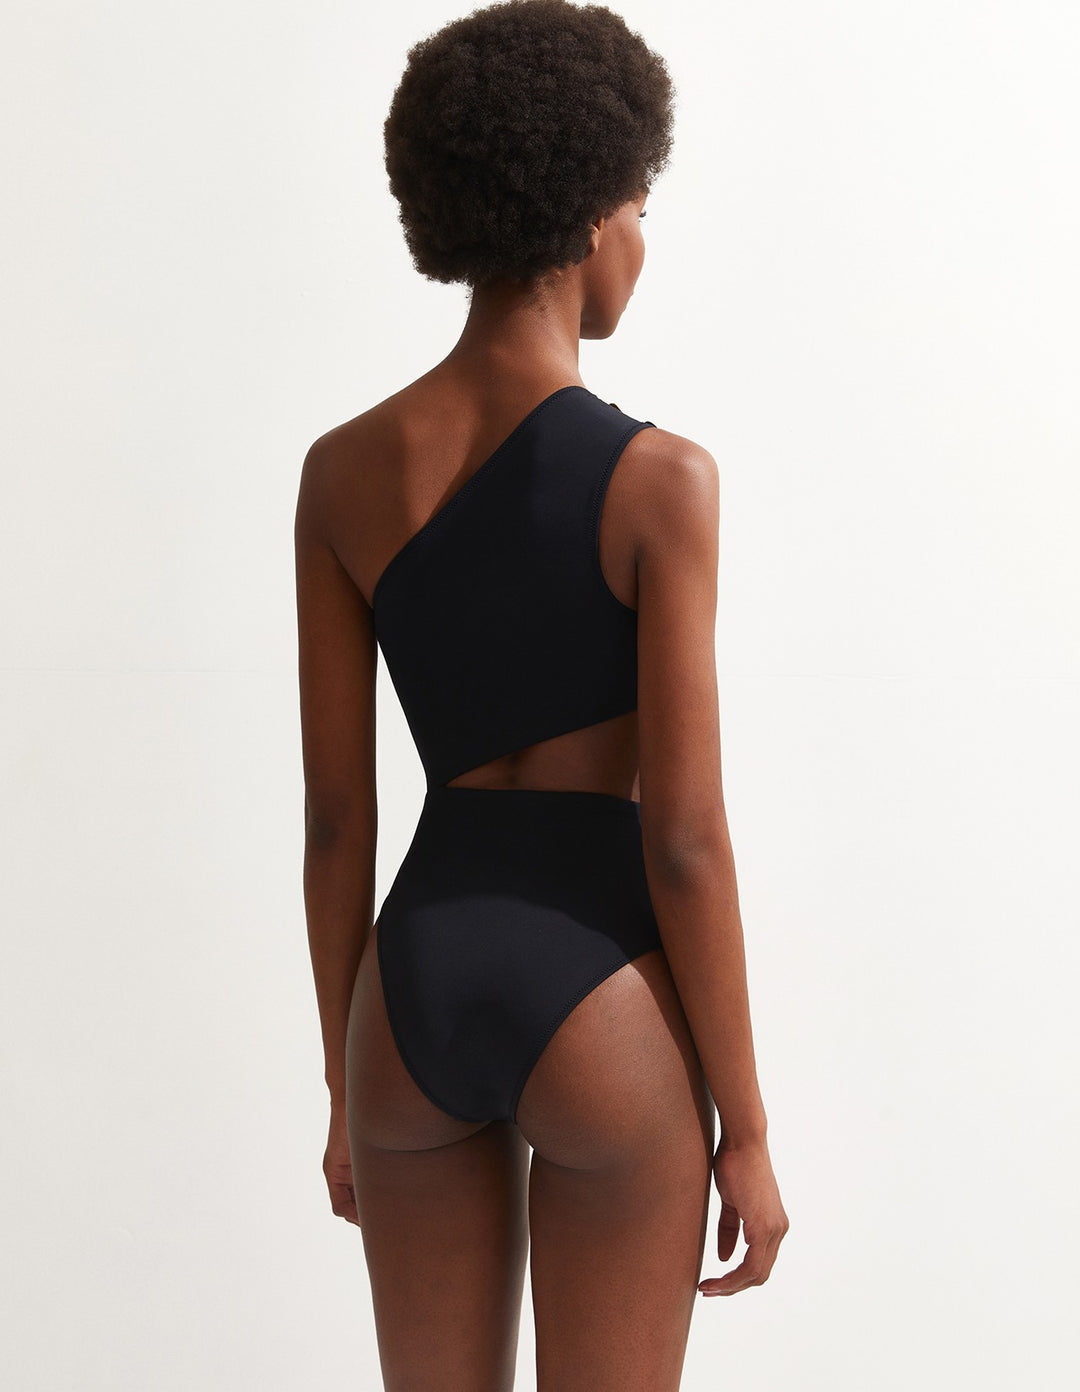 OYE Swimwear Rhea Black One Piece Swimsuit with Gold Buttons